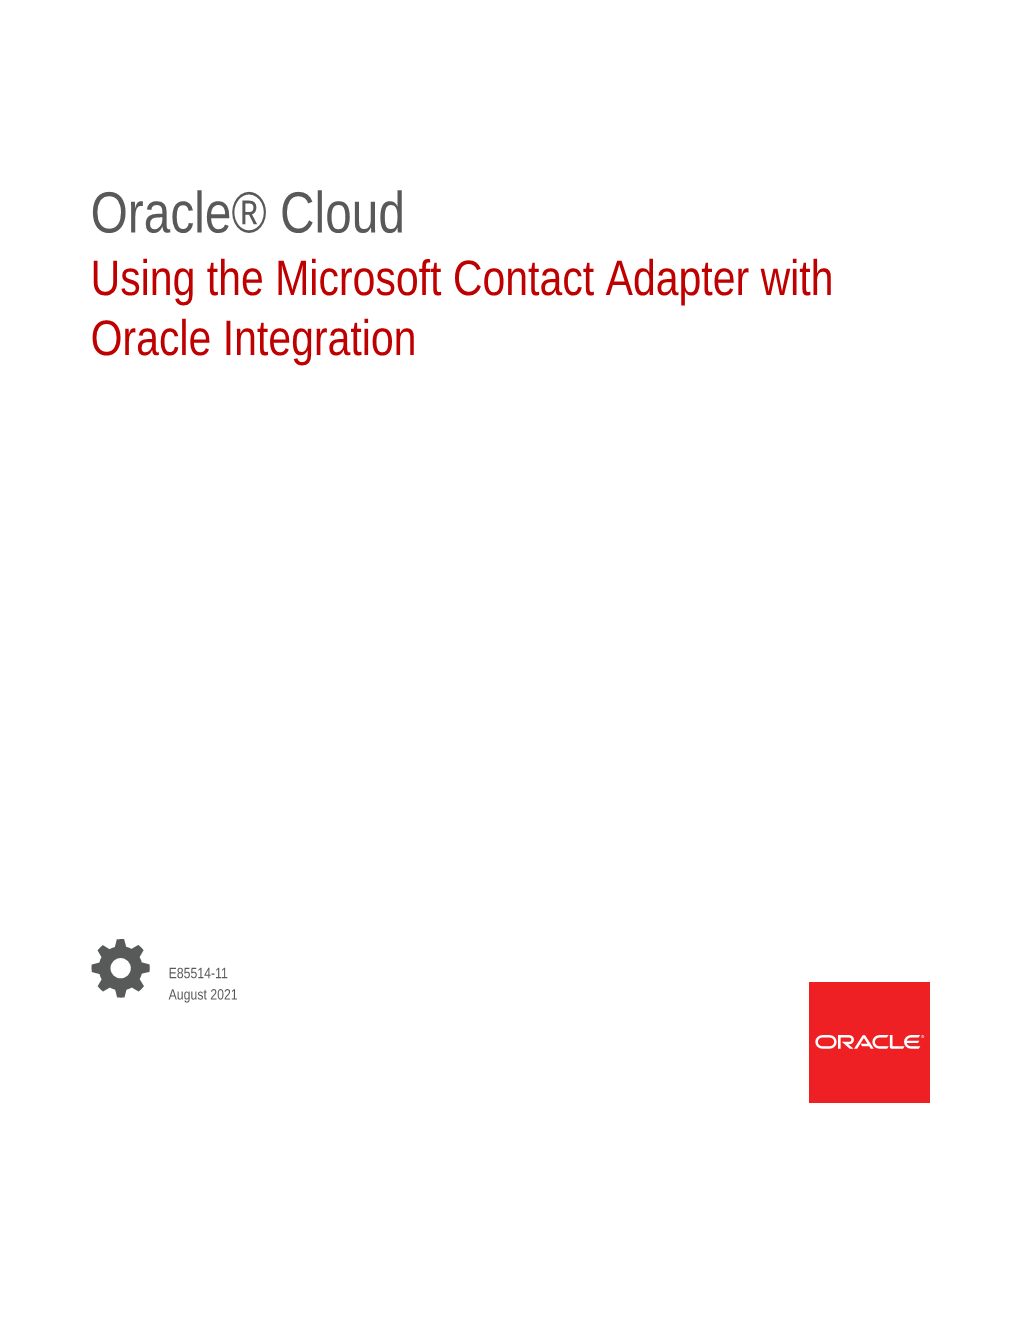 Using the Microsoft Contact Adapter with Oracle Integration